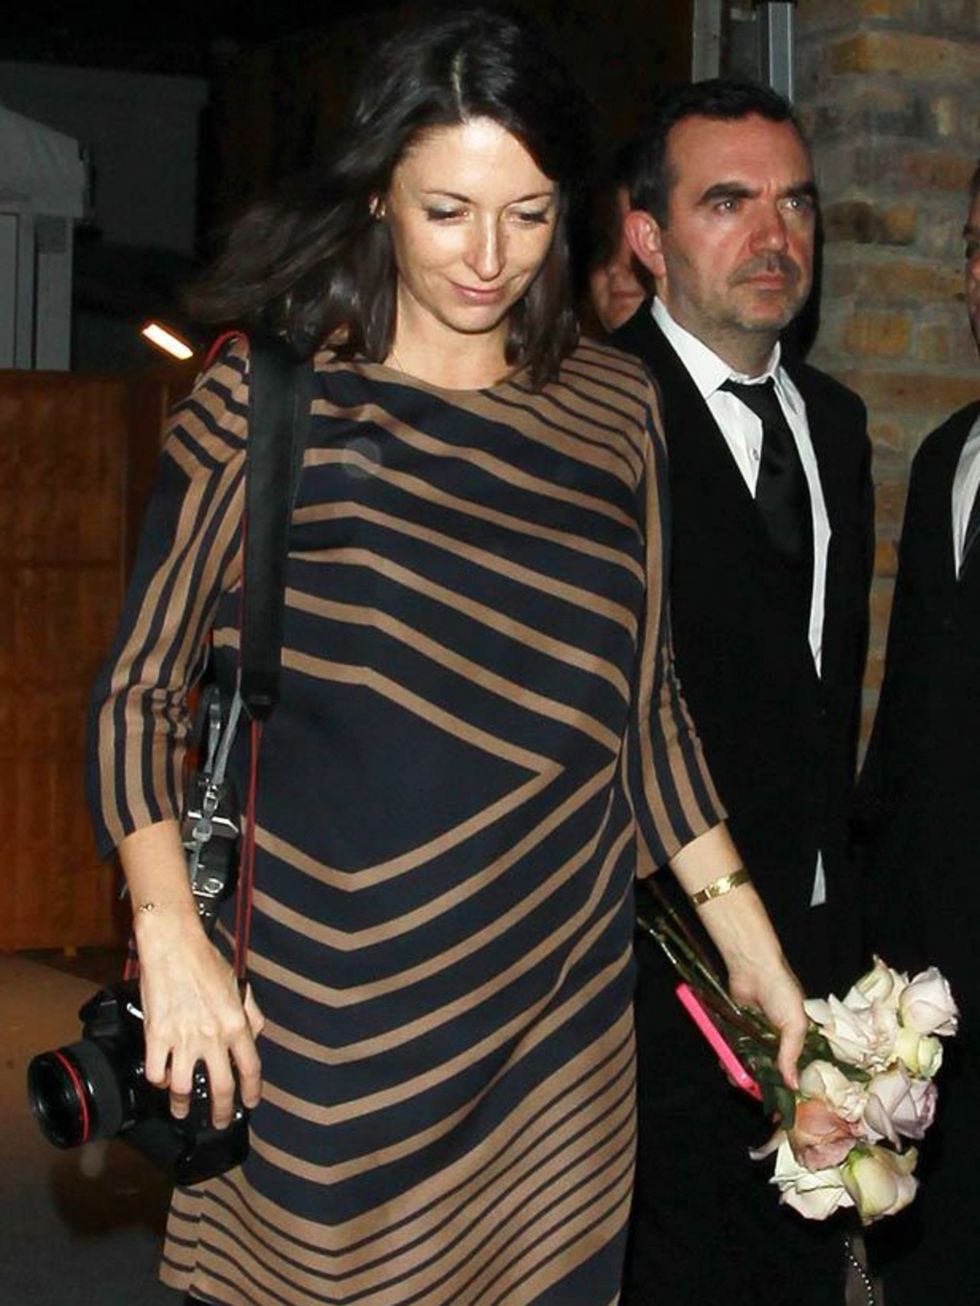 <p>Mary McCartney wears <a href="http://www.elleuk.com/catwalk/collections/stella-mccartney/autumn-winter-2011/review">Stella McCartney</a> for the wedding of Paul McCartney and Nancy Shevell in London, October 2011.</p>